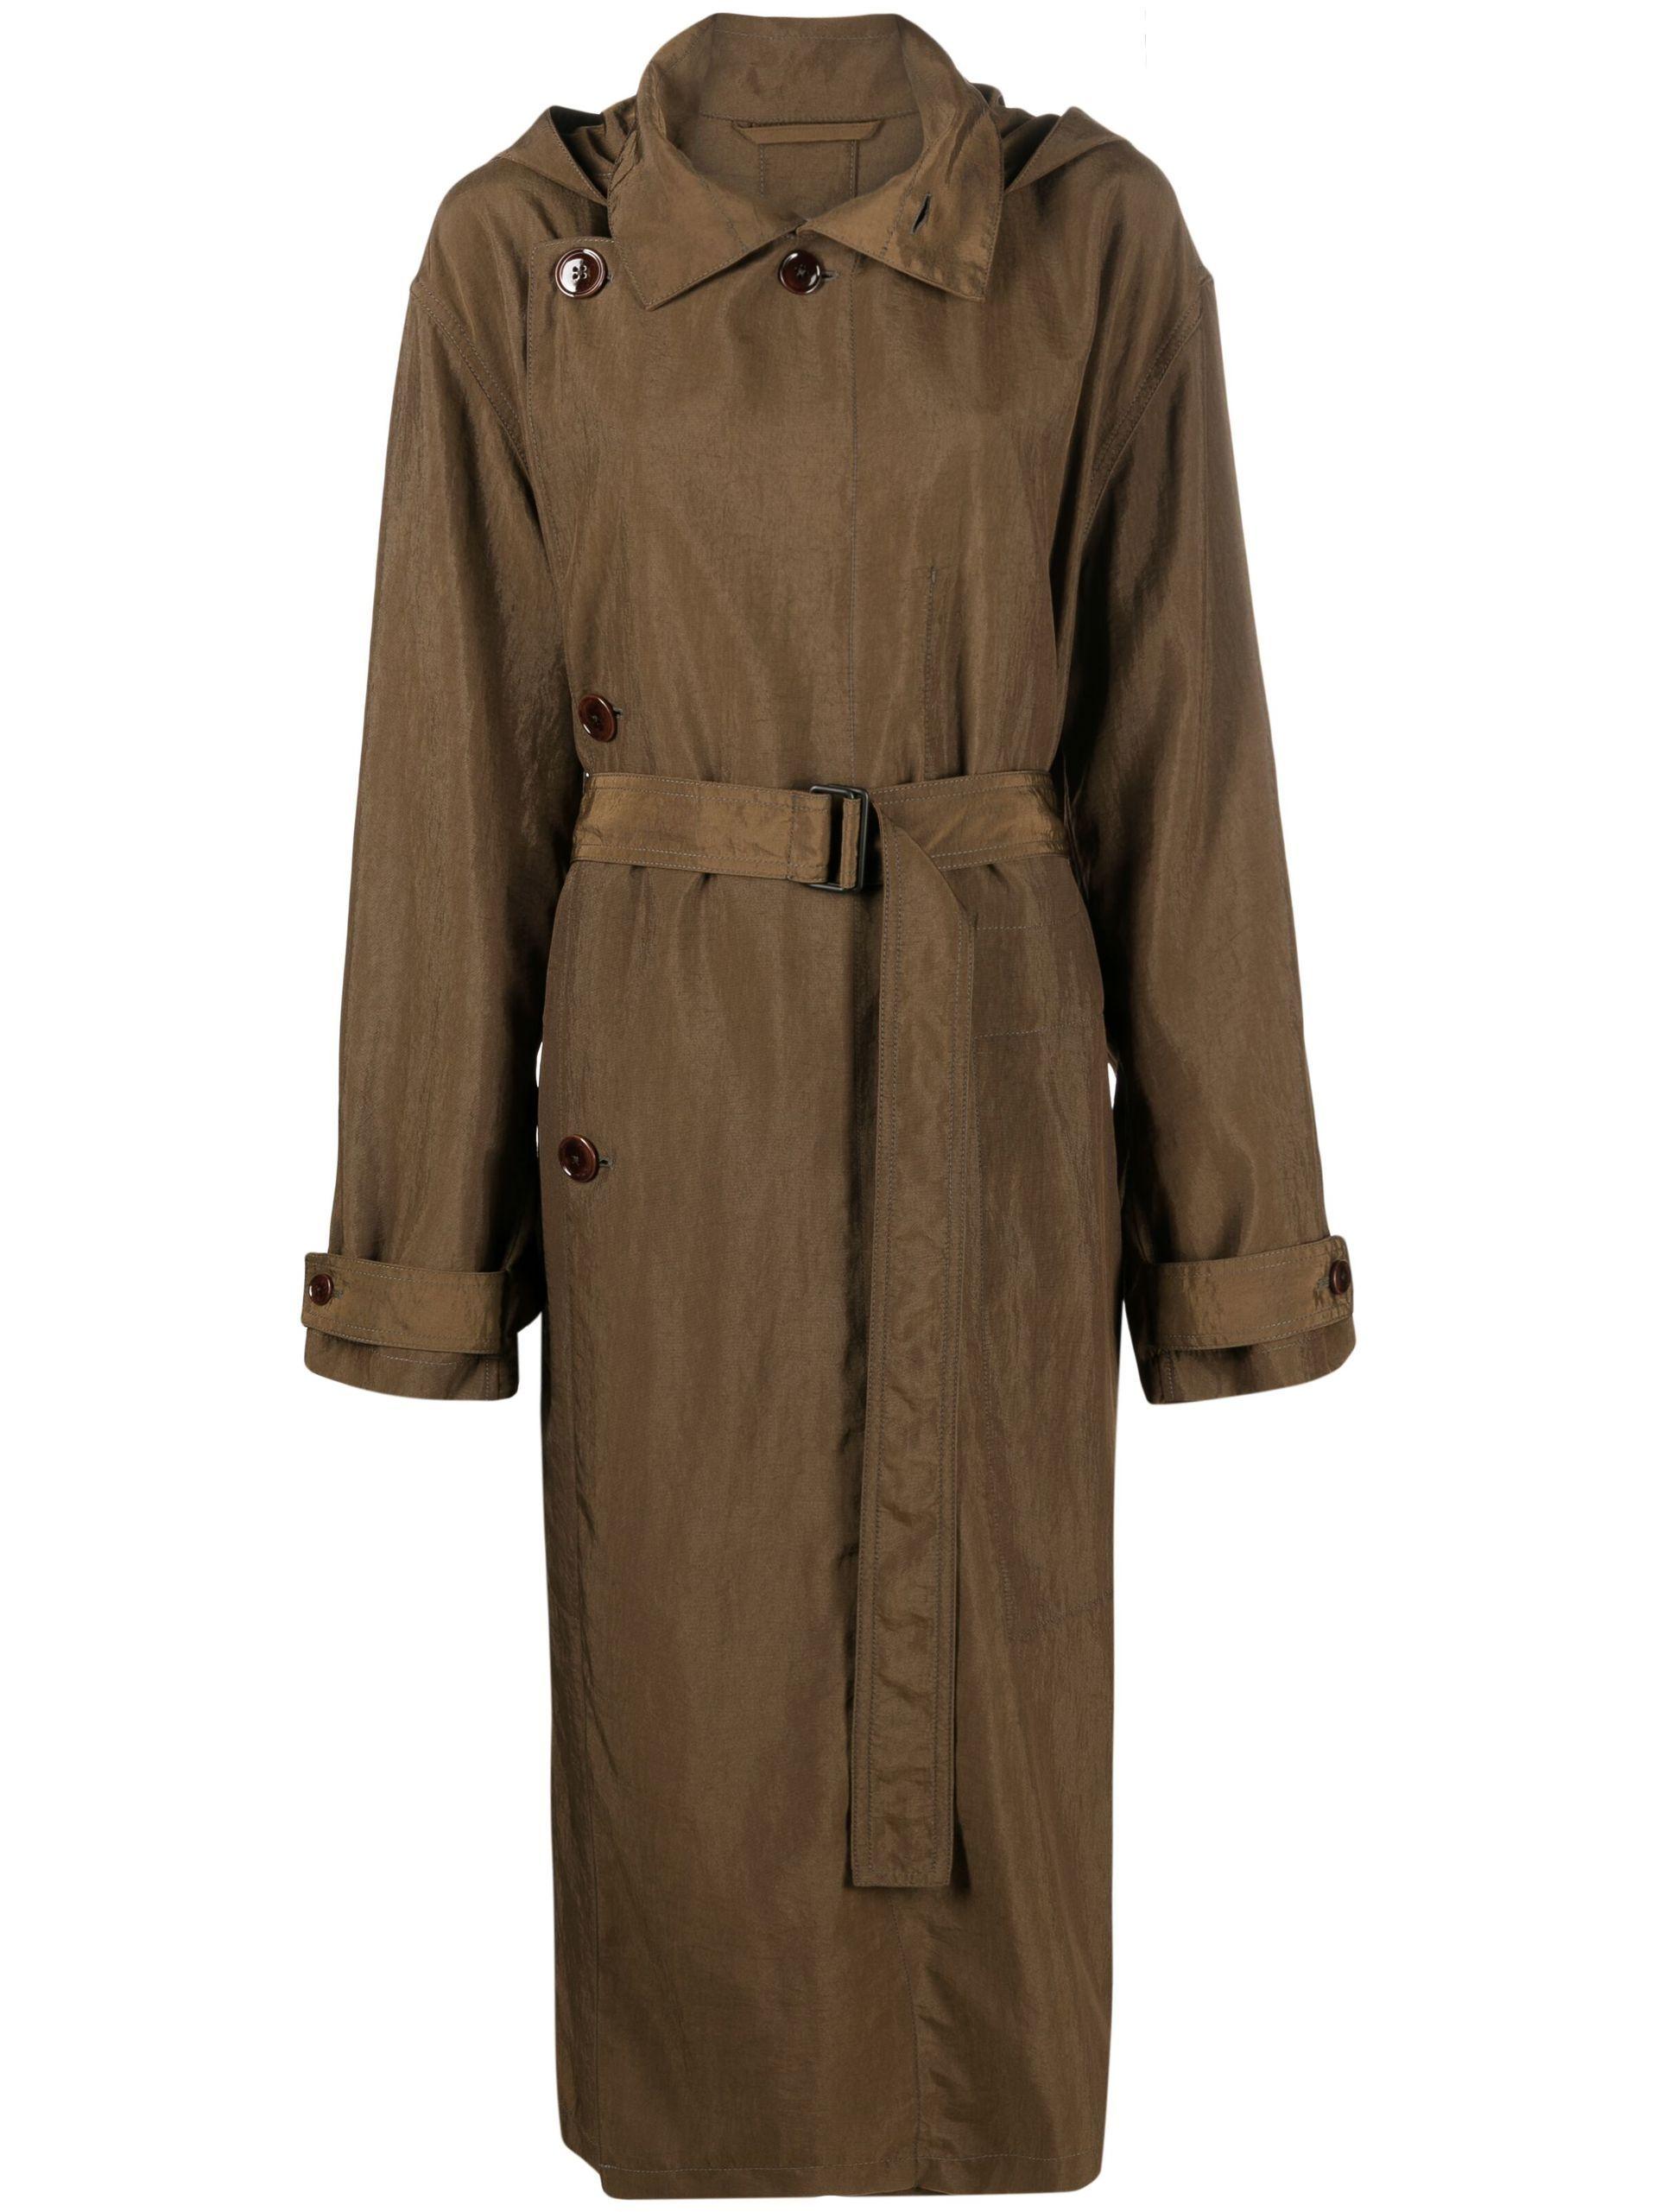 Lemaire Hooded Trench Coat in Natural | Lyst